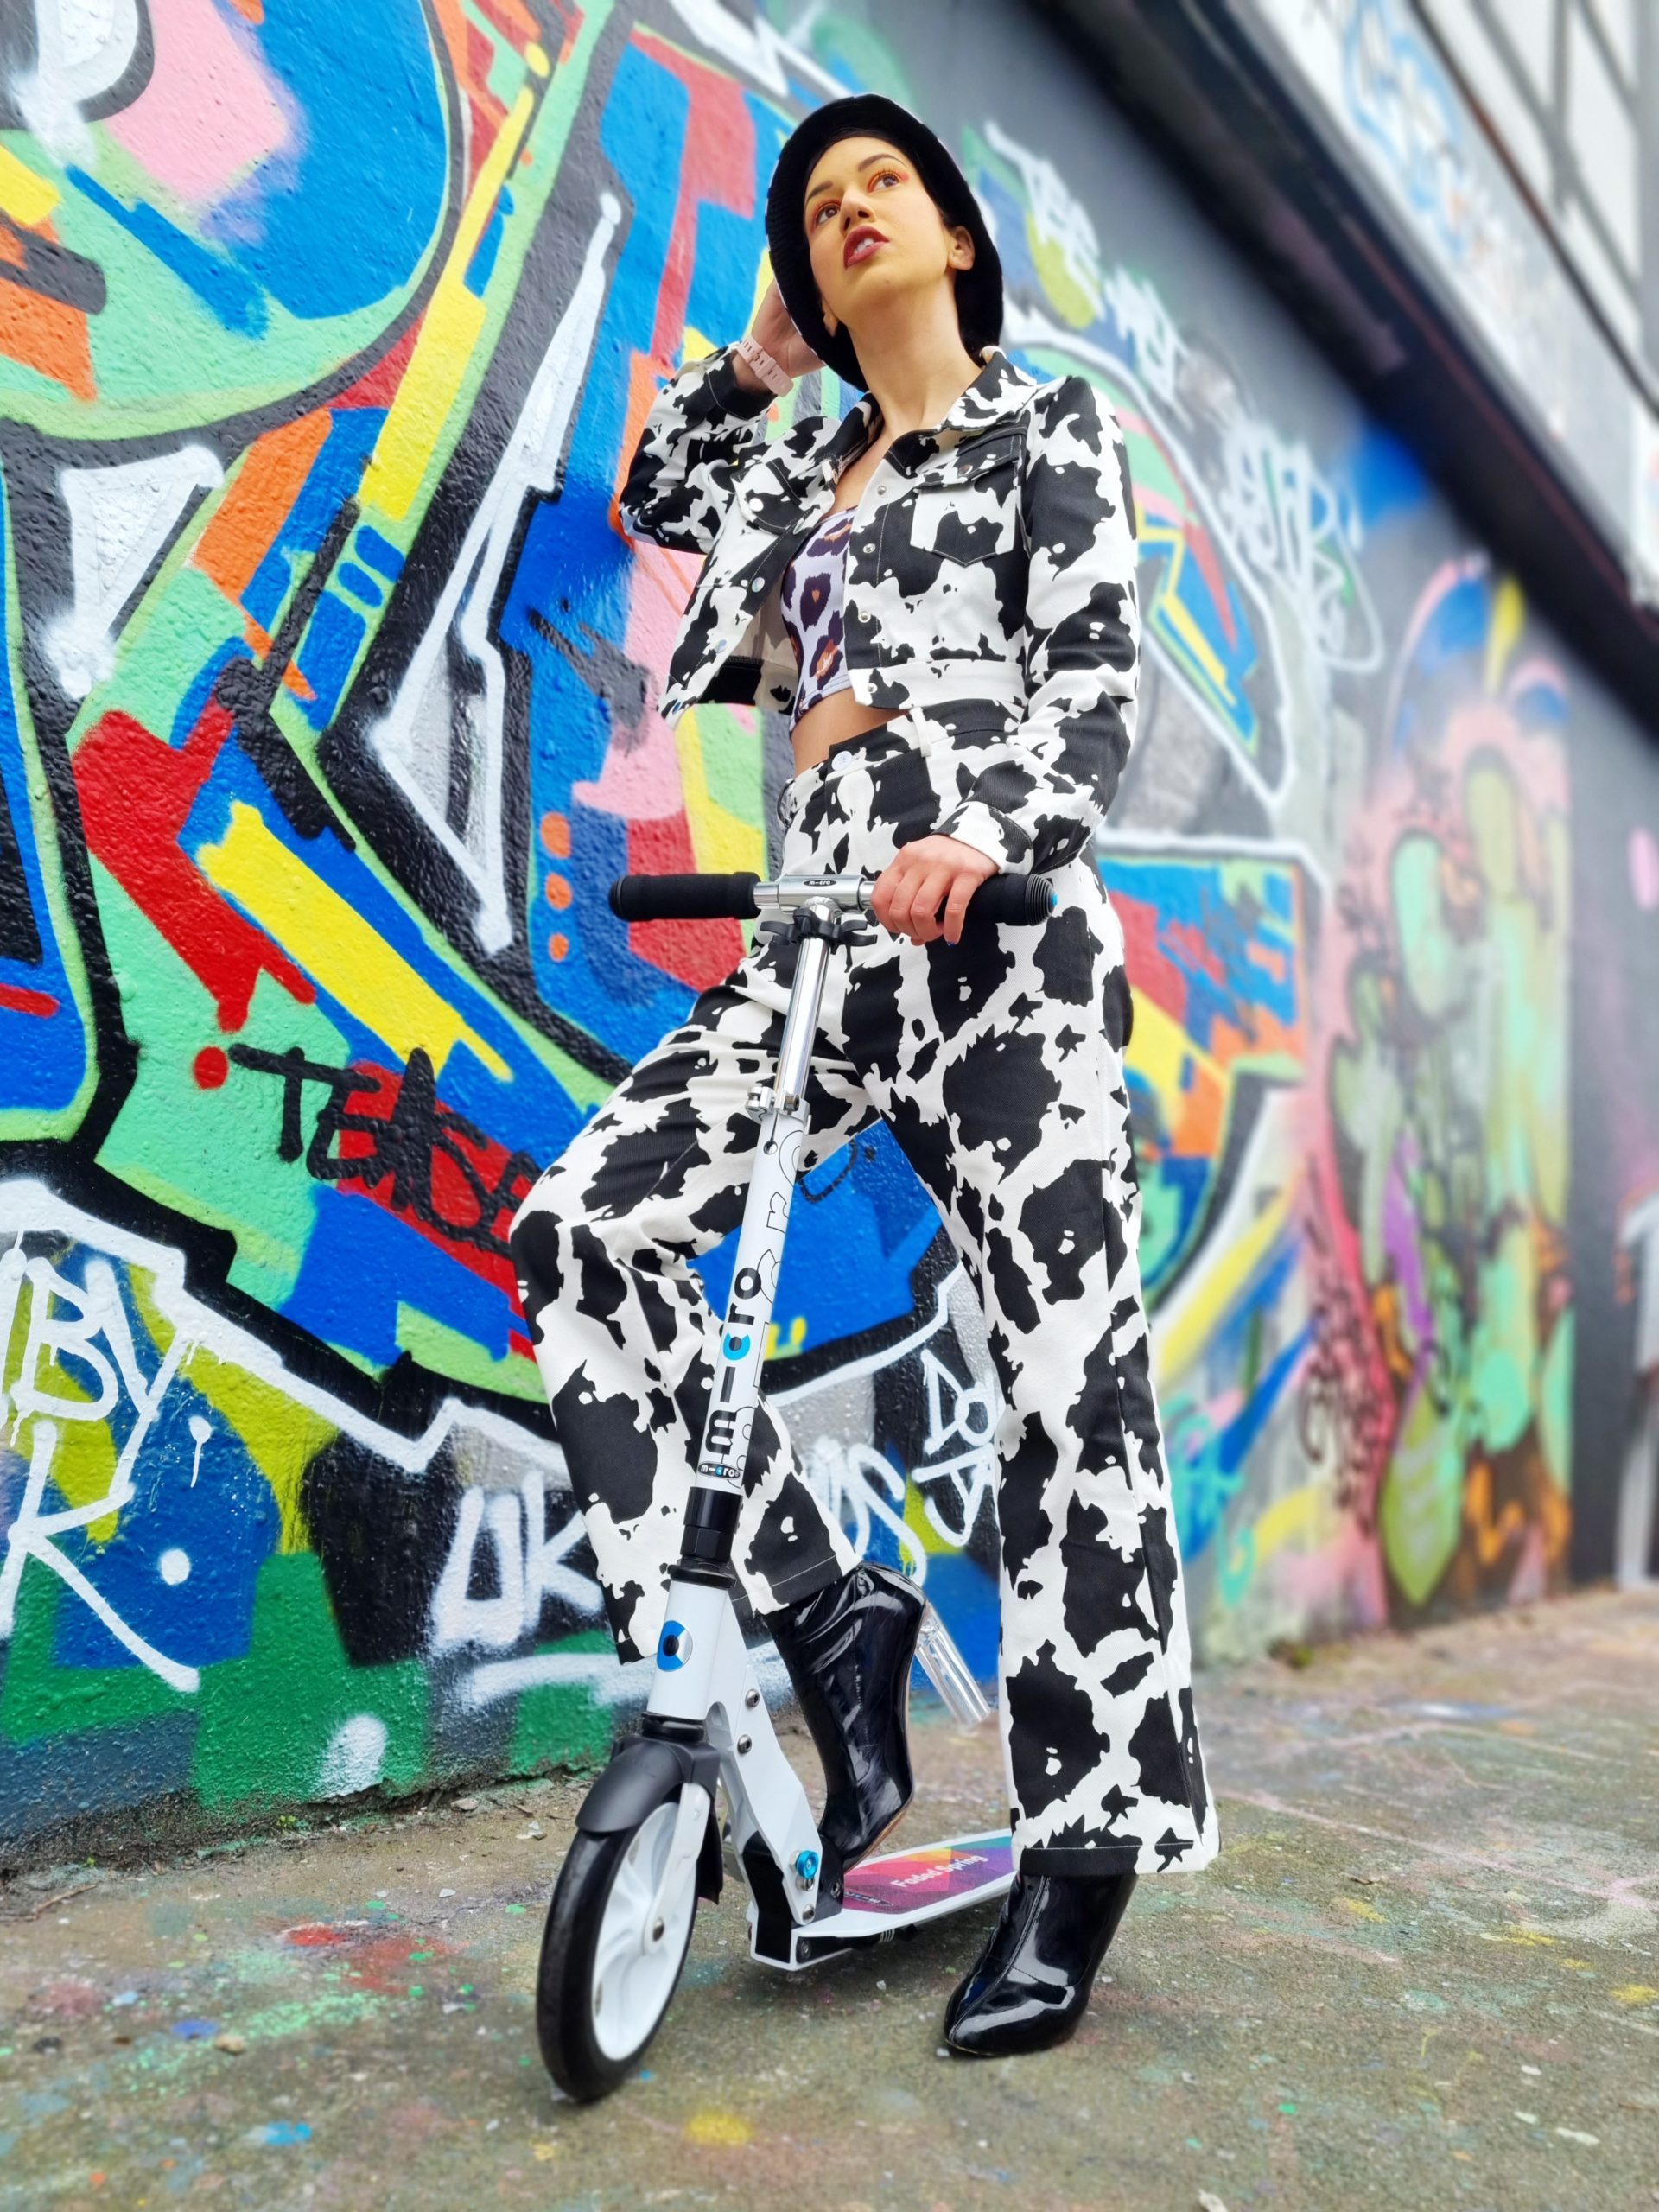 <img src="ana.jpg" alt="ana in cow print coord on micro scooter"/> 